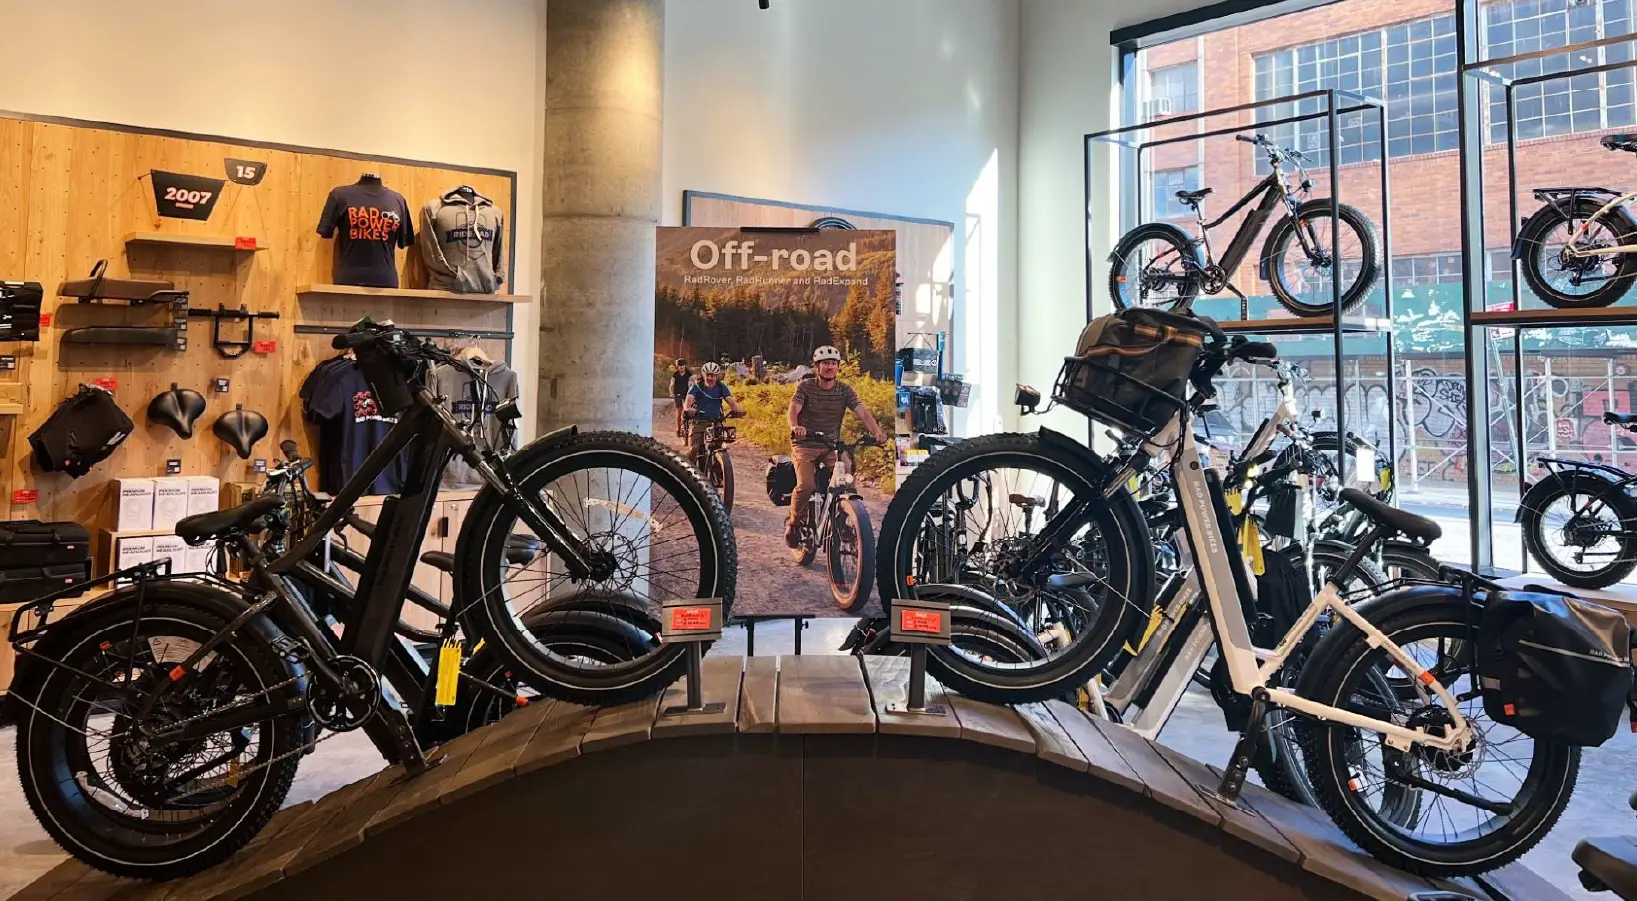 In-store image from a Rad Power Bikes store showcasing several electric bikes on display.